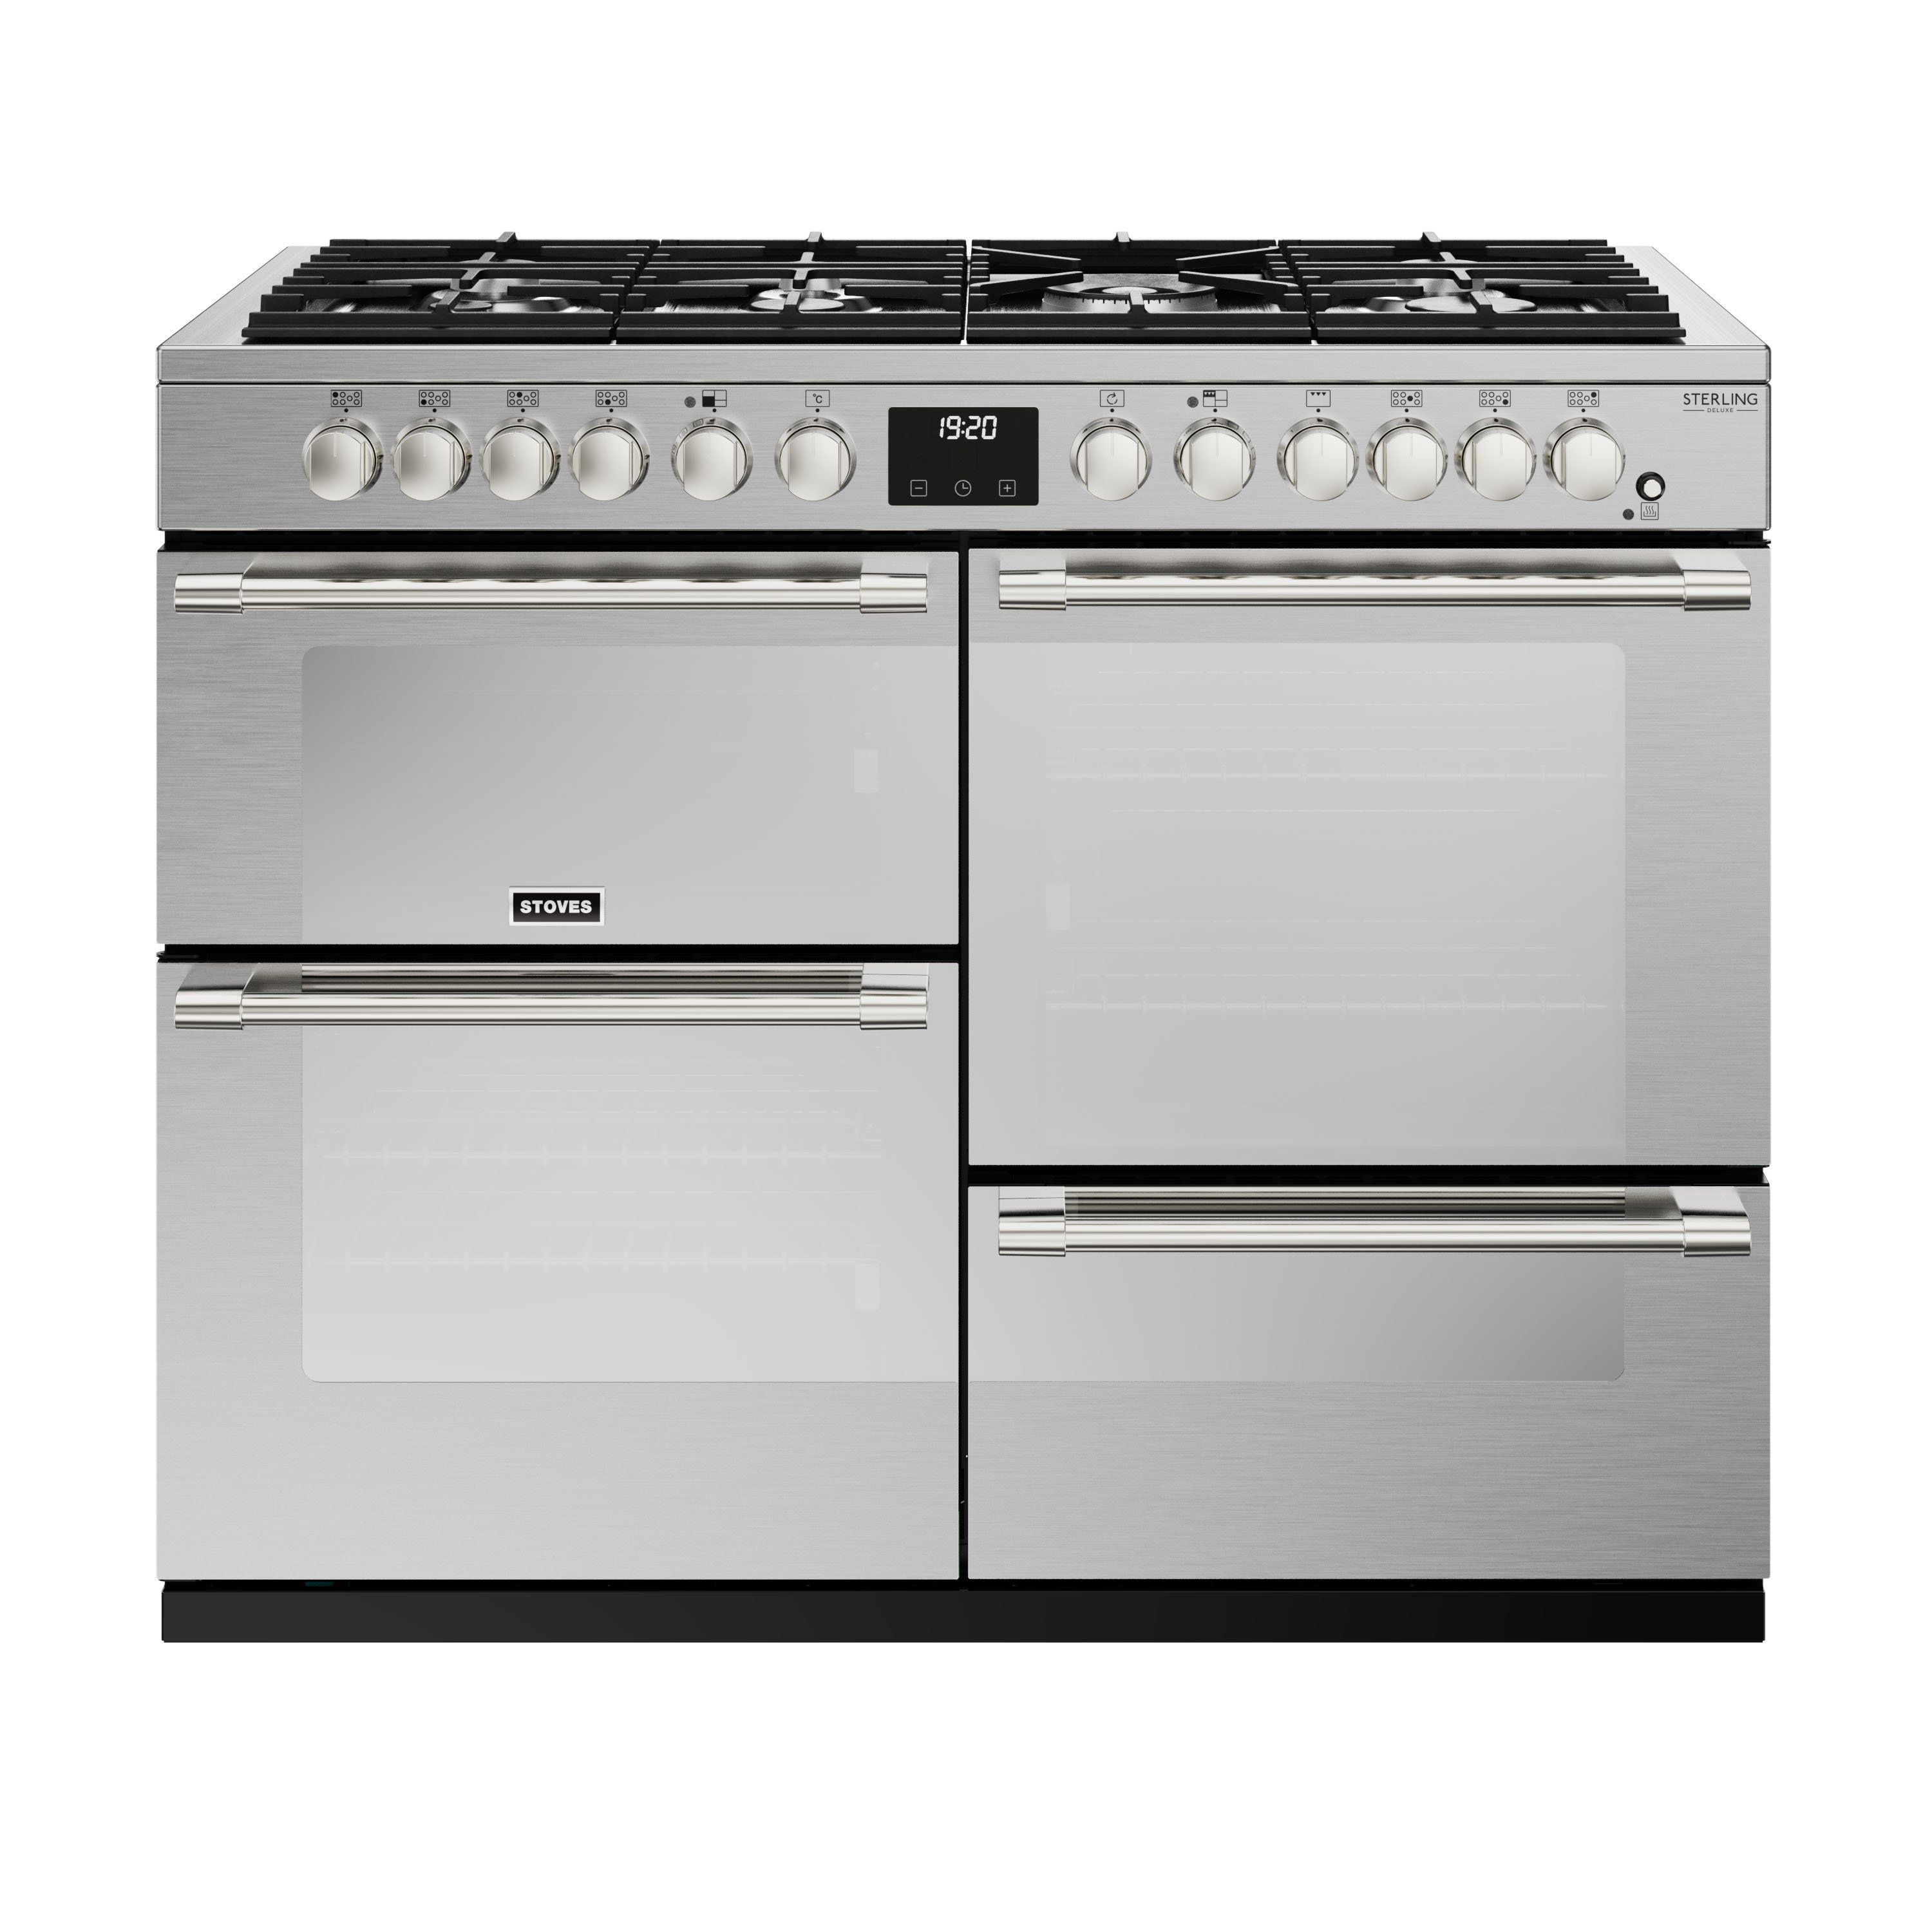 110cm dual fuel range cooker with a 7 burner gas hob, conventional oven & grill, multifunction main oven with TrueTemp digital thermostat, fanned second oven and dedicated slow cook oven